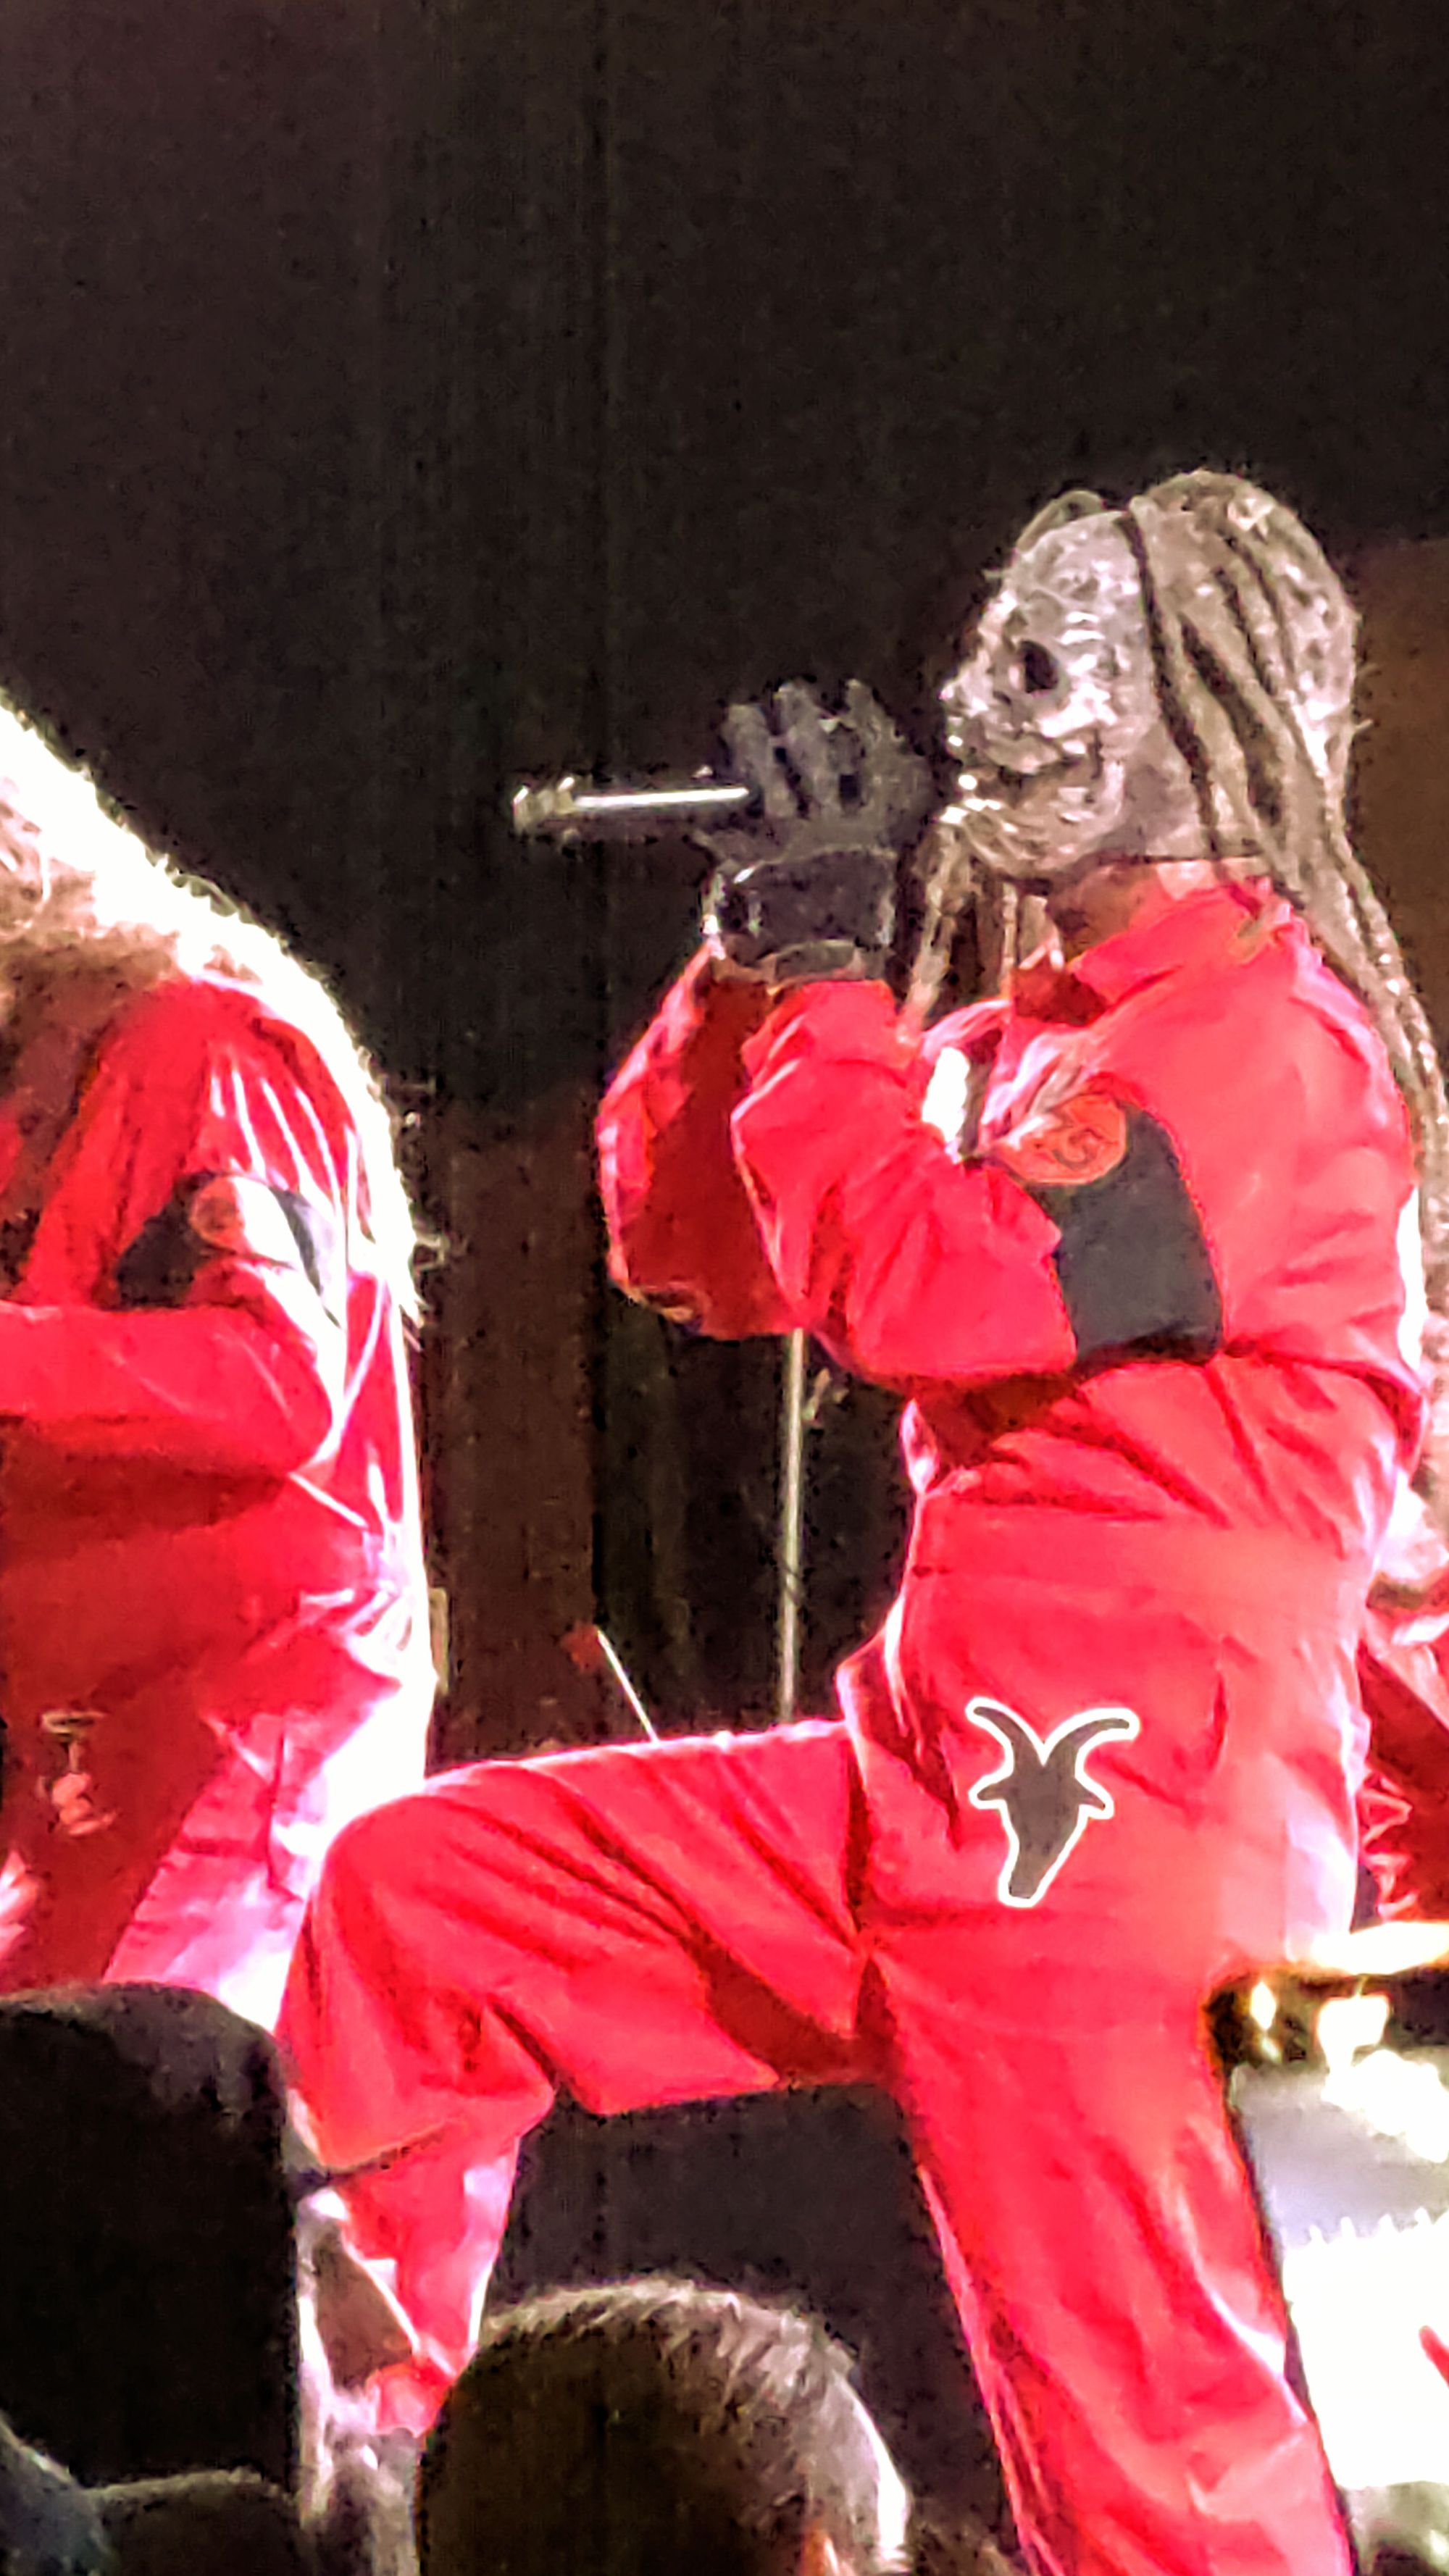 Concert Review: Slipknot, live at Pappy + Harriet’s